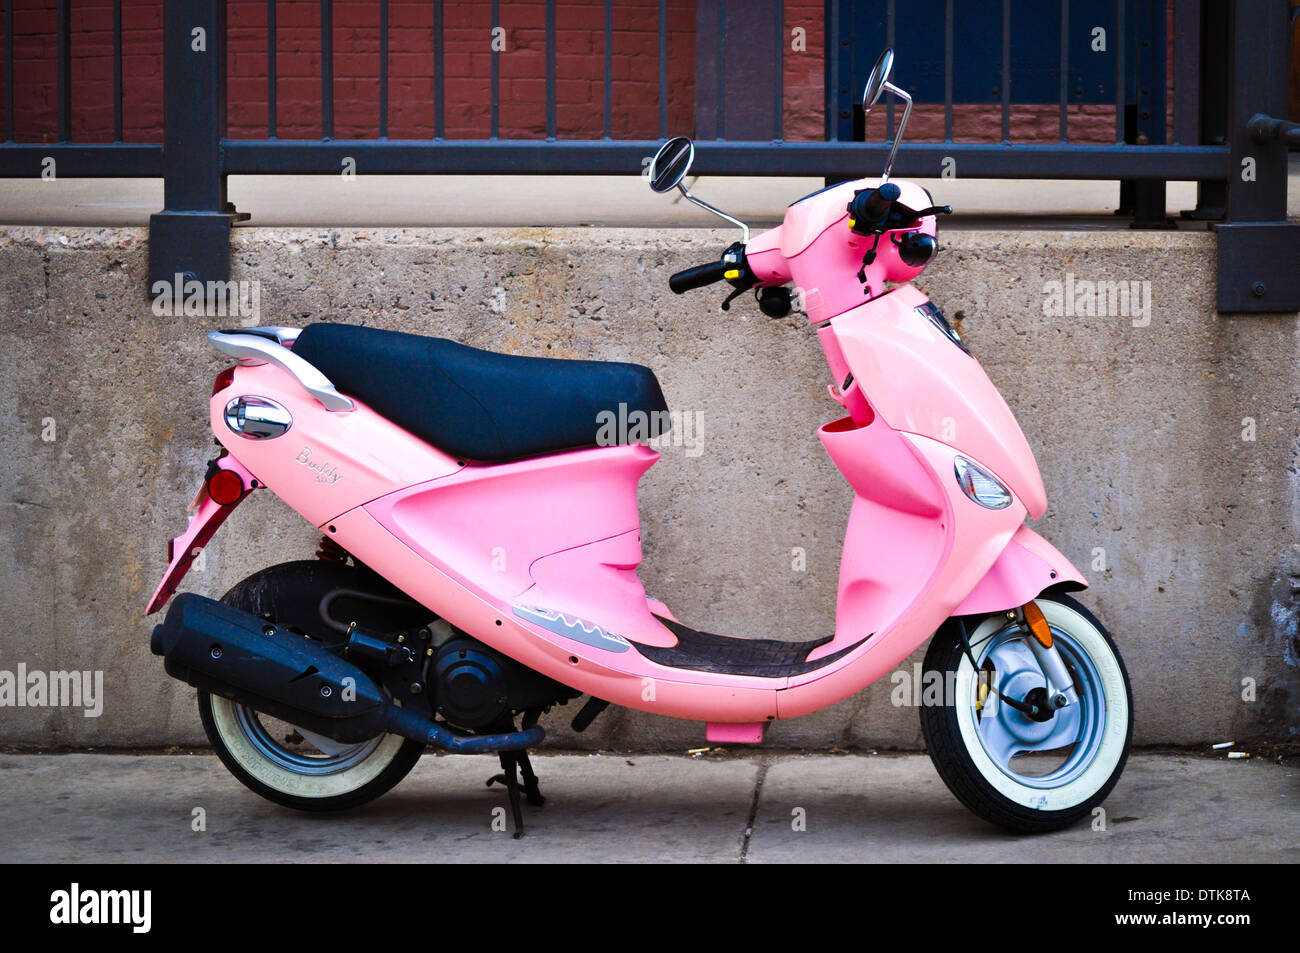 pink motor scooter